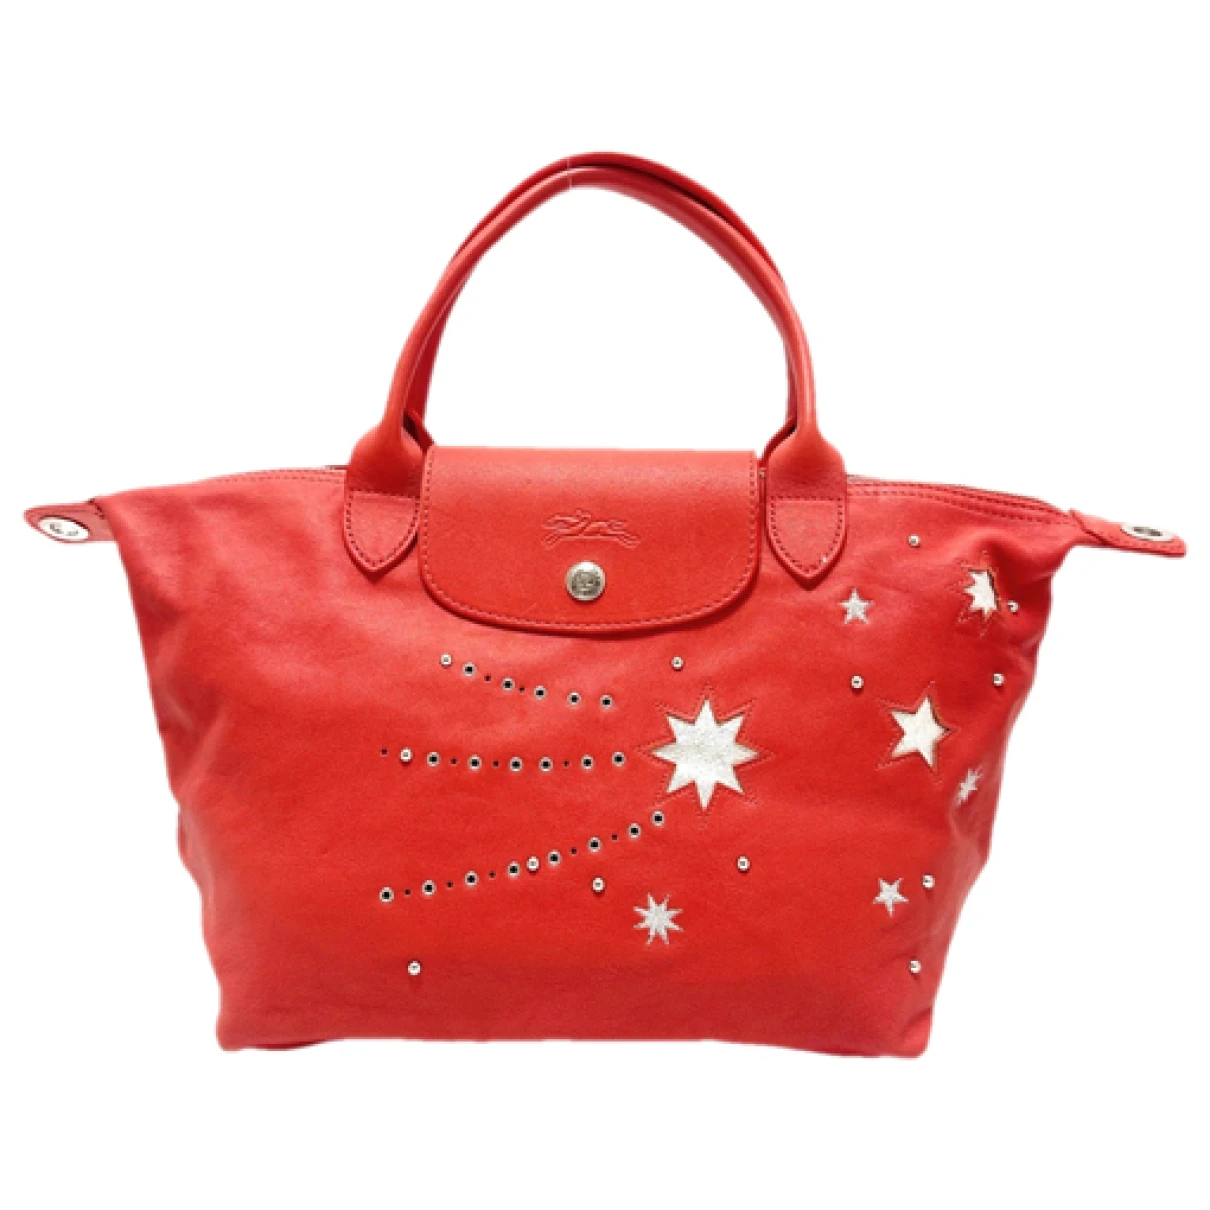 Pre-owned Longchamp Pliage Leather Handbag In Red